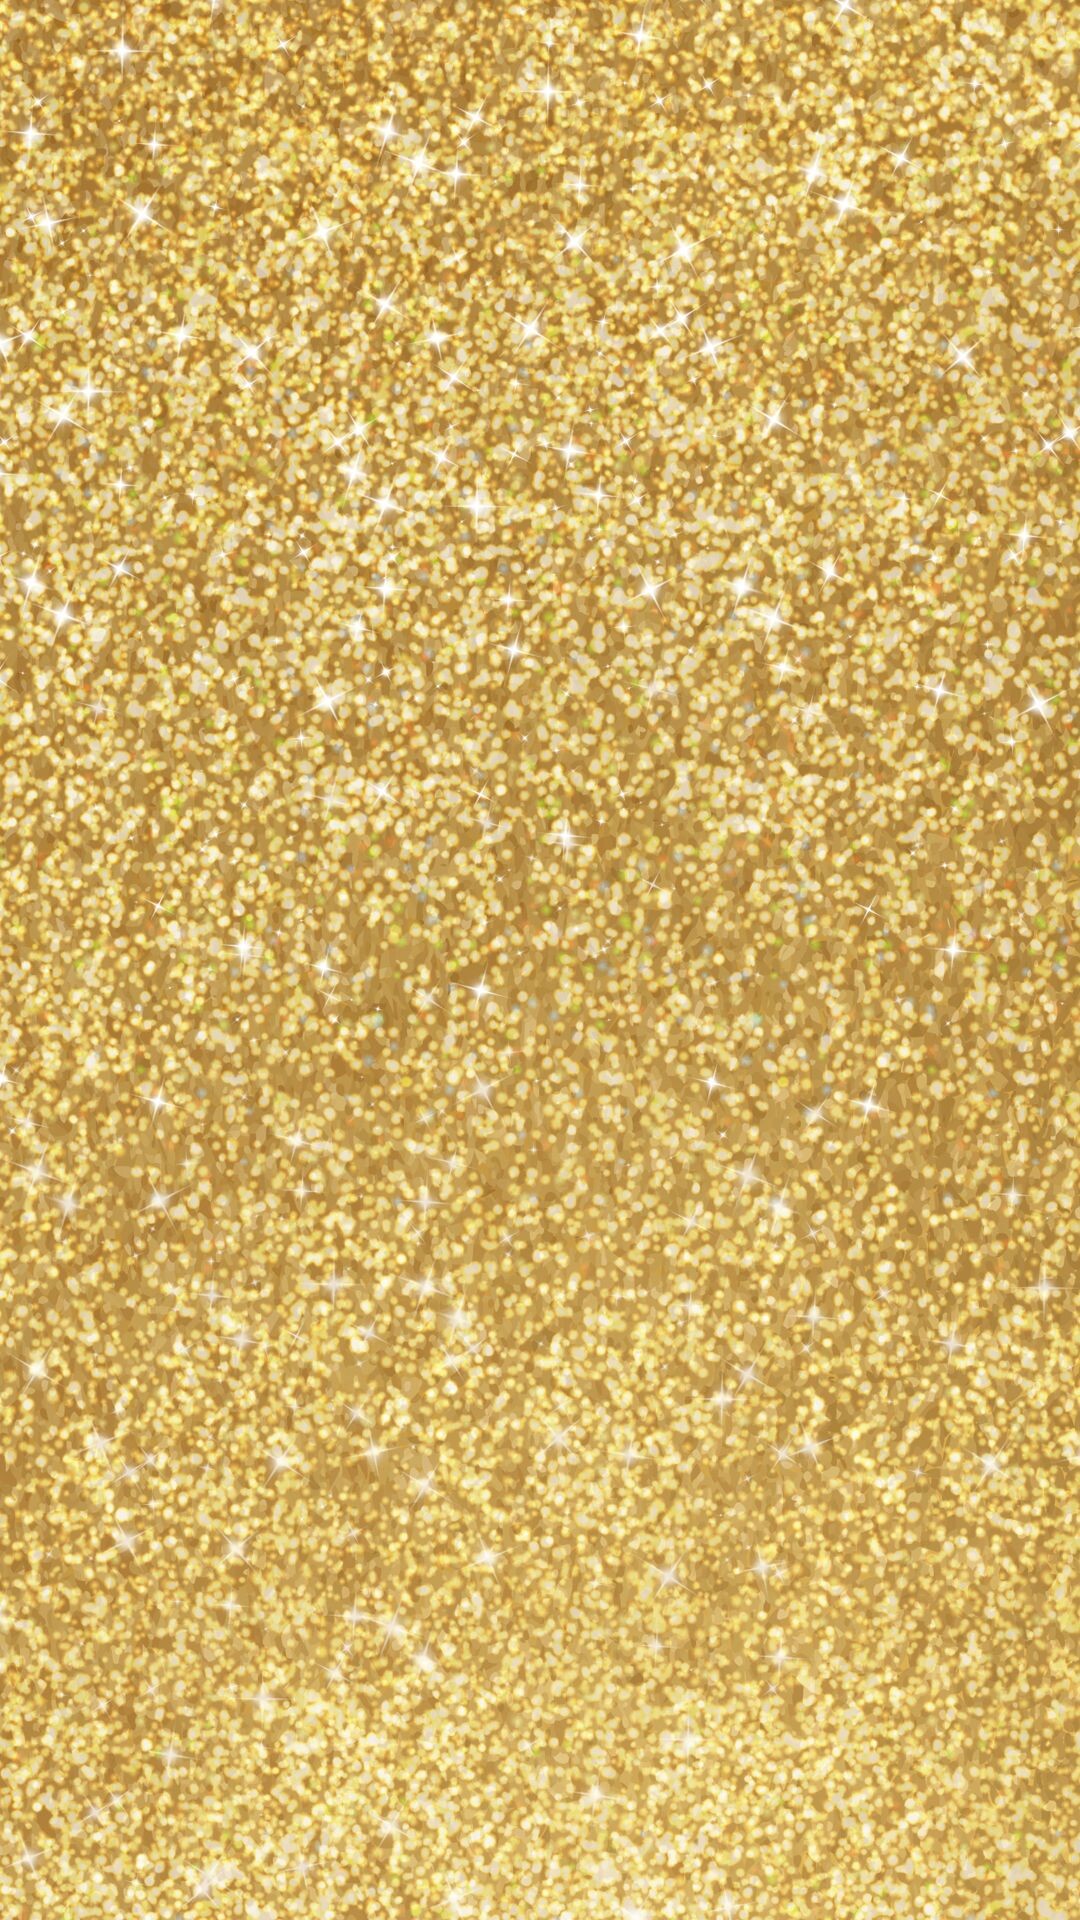 Gold Sparkle: Shiny glittering decoration, Flat multi-layered sheets cut into tiny particles. 1080x1920 Full HD Background.